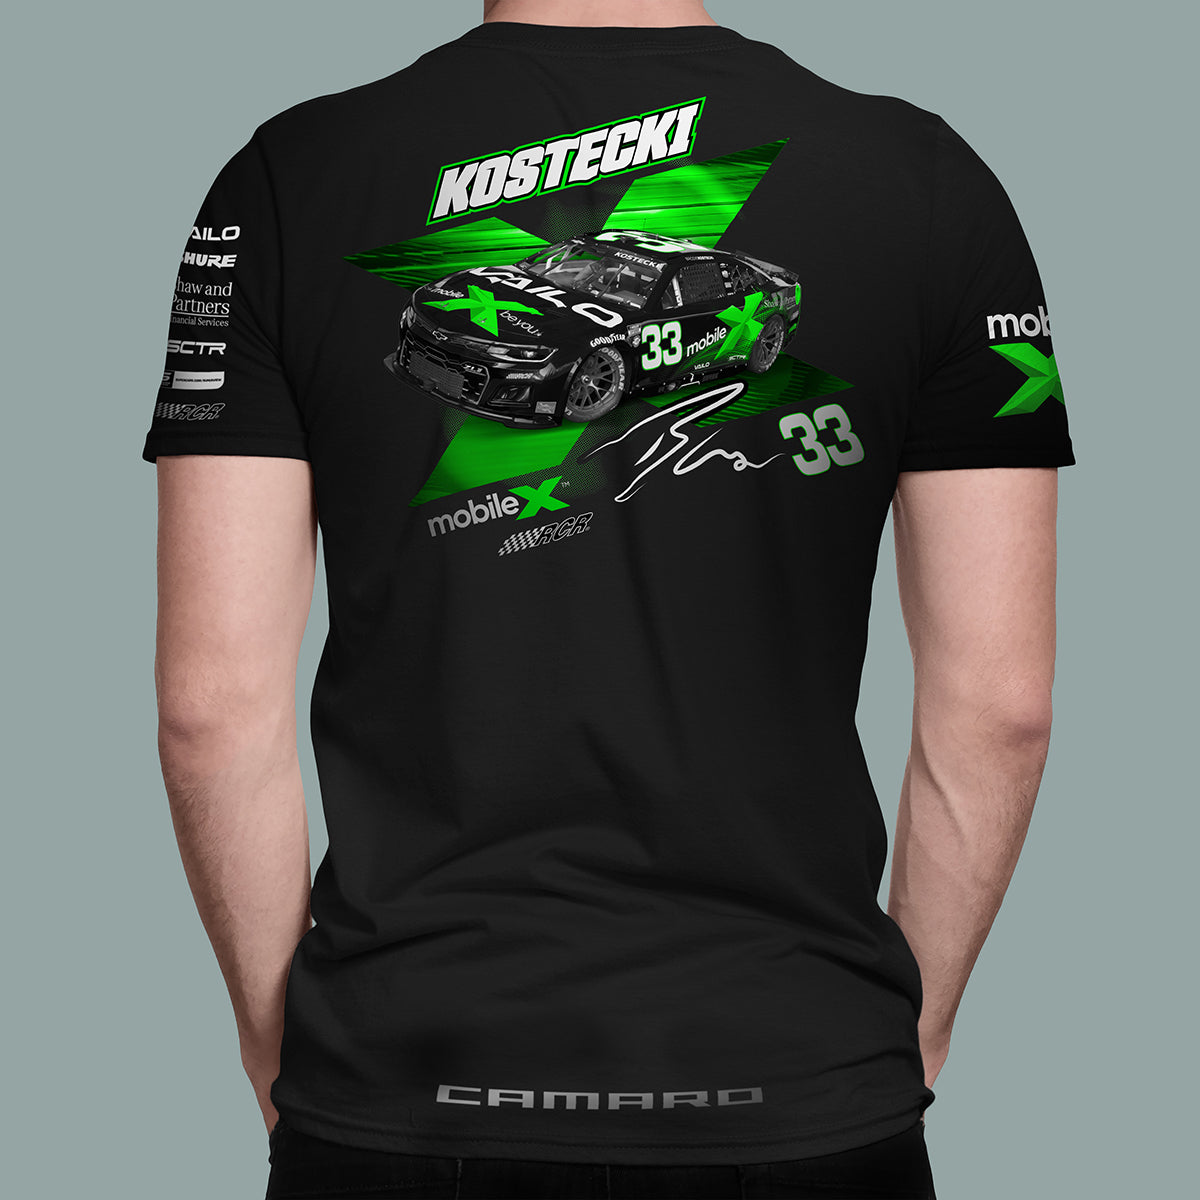 Racer X33 Limited Edition tee